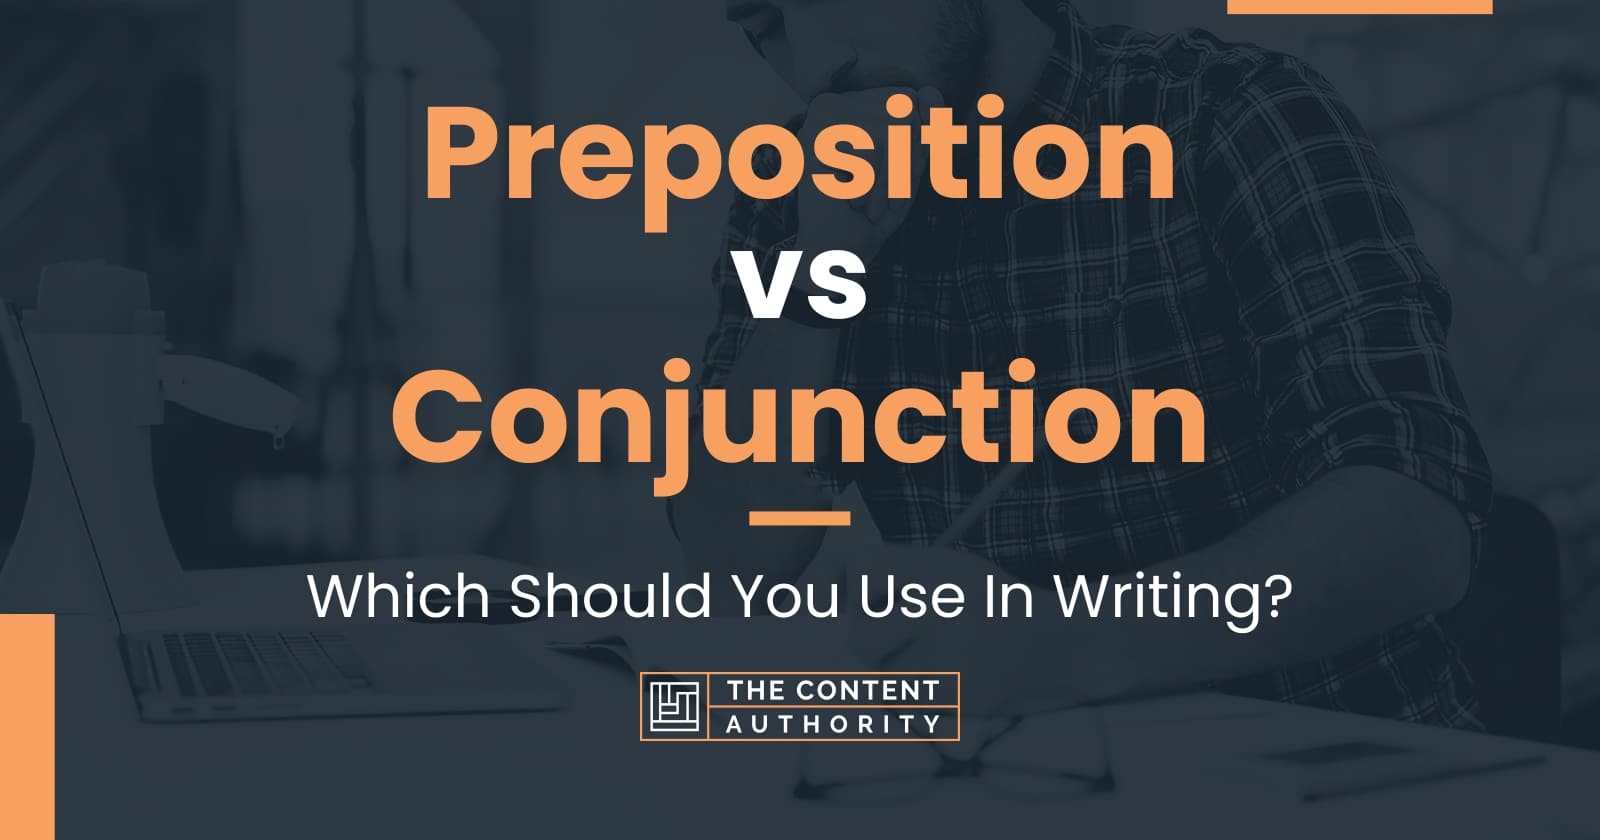 preposition-vs-conjunction-which-should-you-use-in-writing